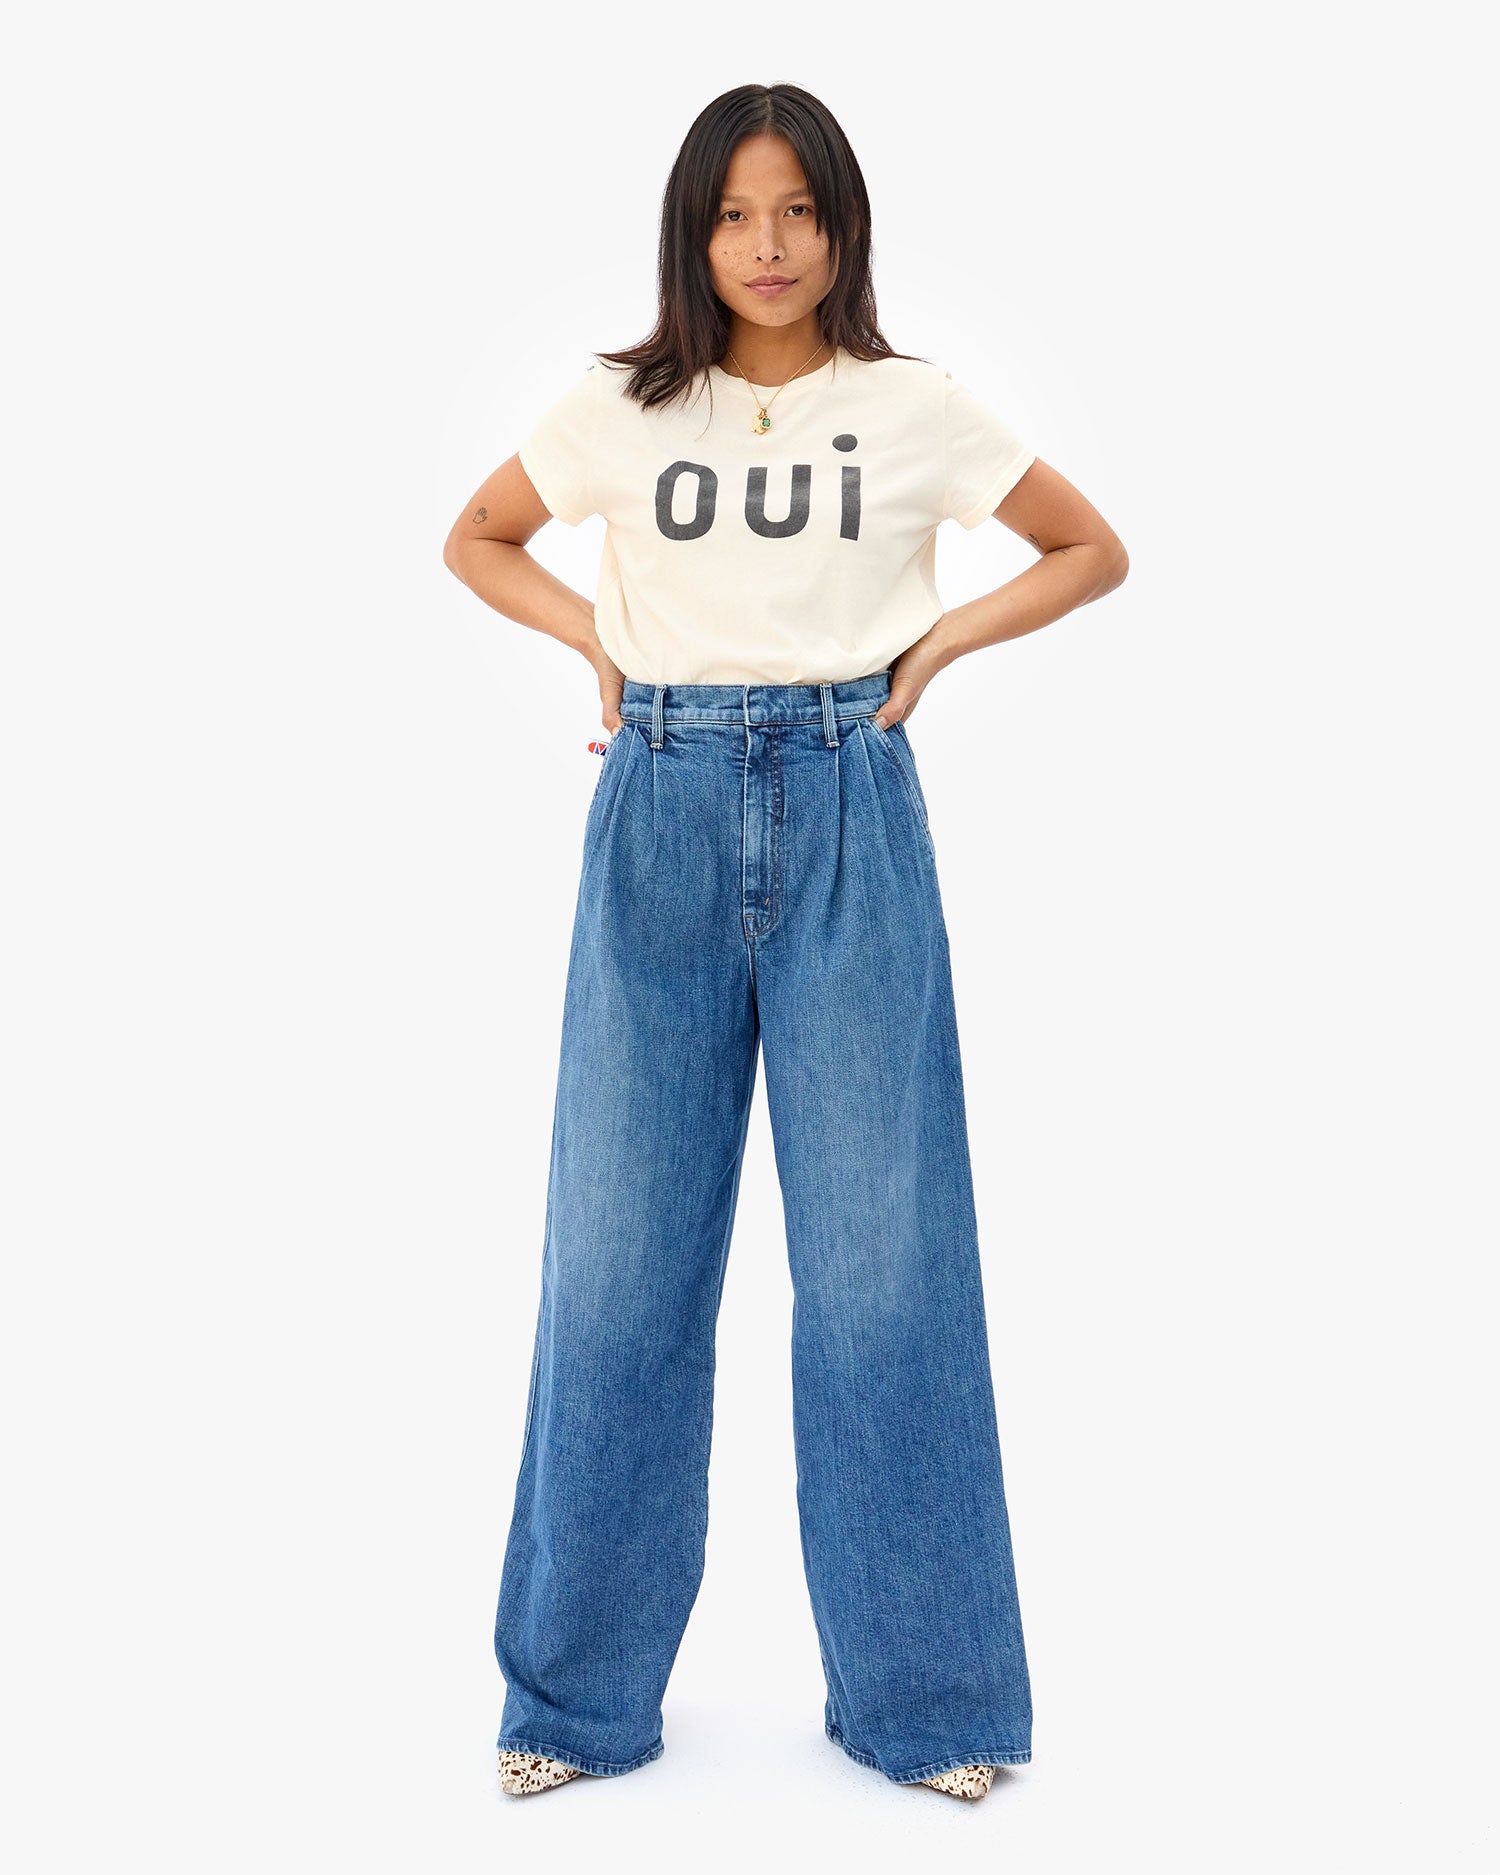 Maly with her hands on her hips in the Cream Oui Classic Tee and wide leg jeans